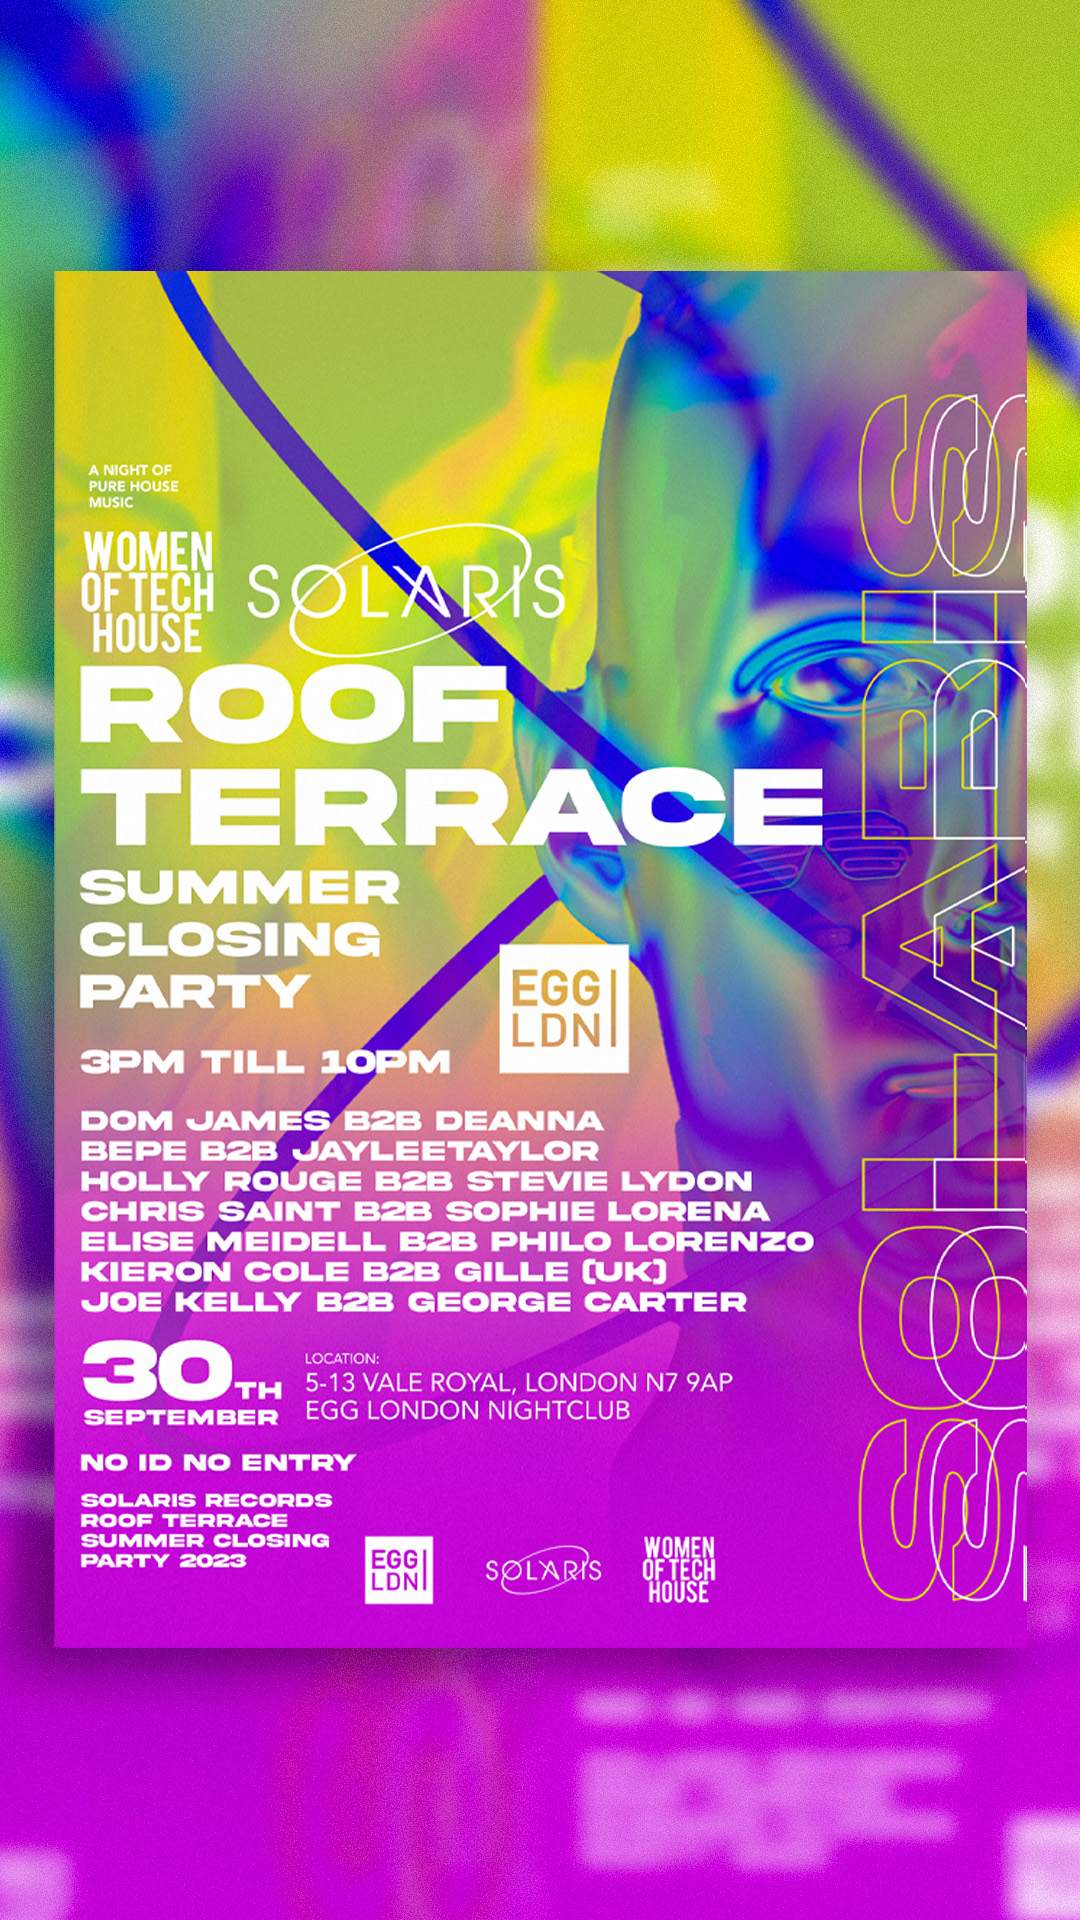 Solaris Records Roof Terrace Party - フライヤー裏